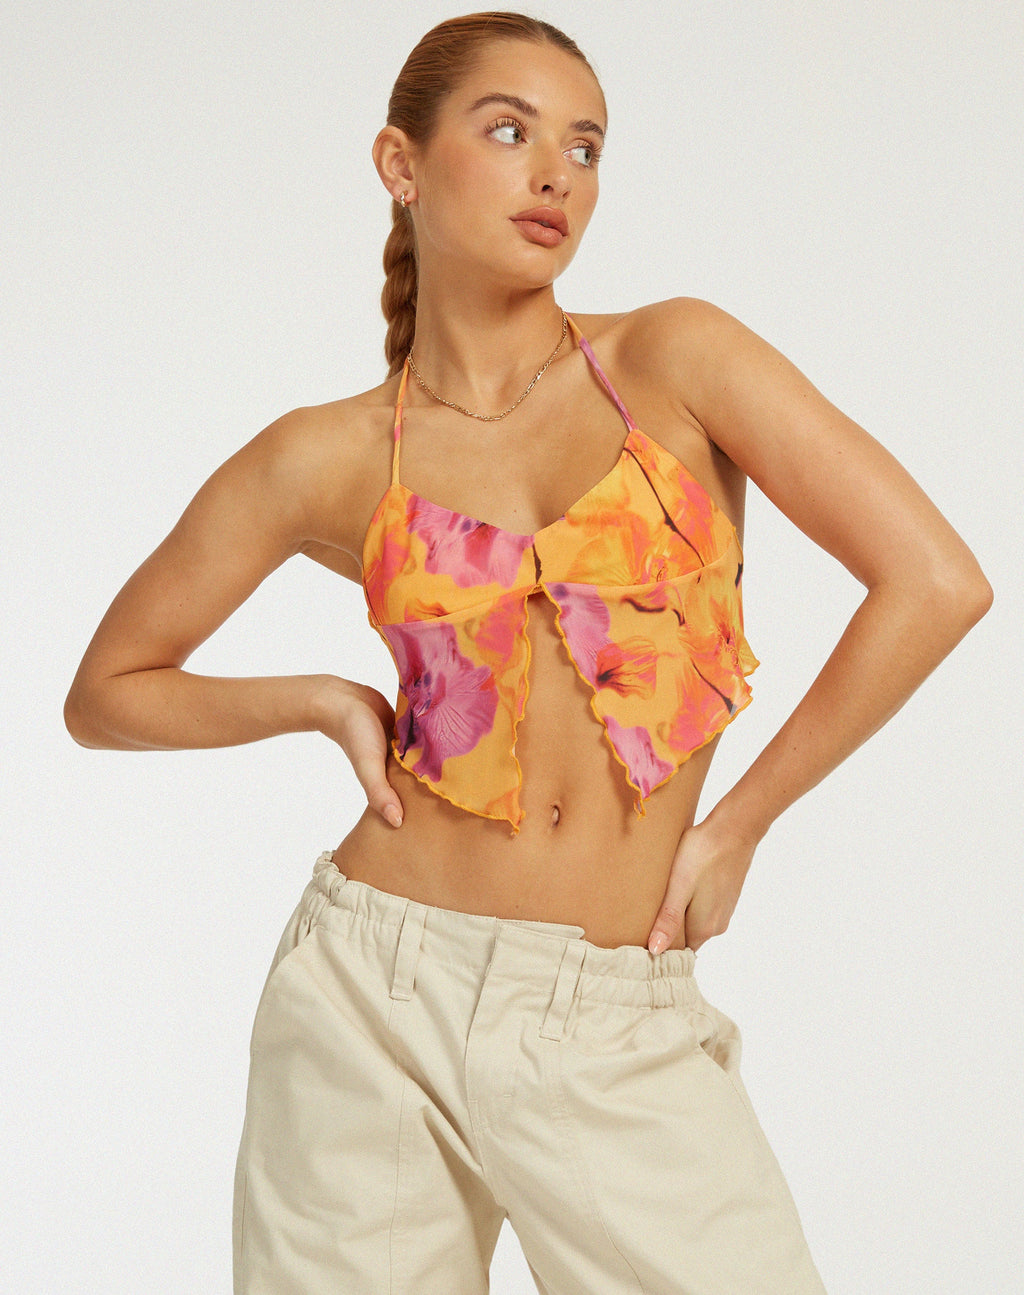 Shaman Cami Top in Blurred Orchid Peach